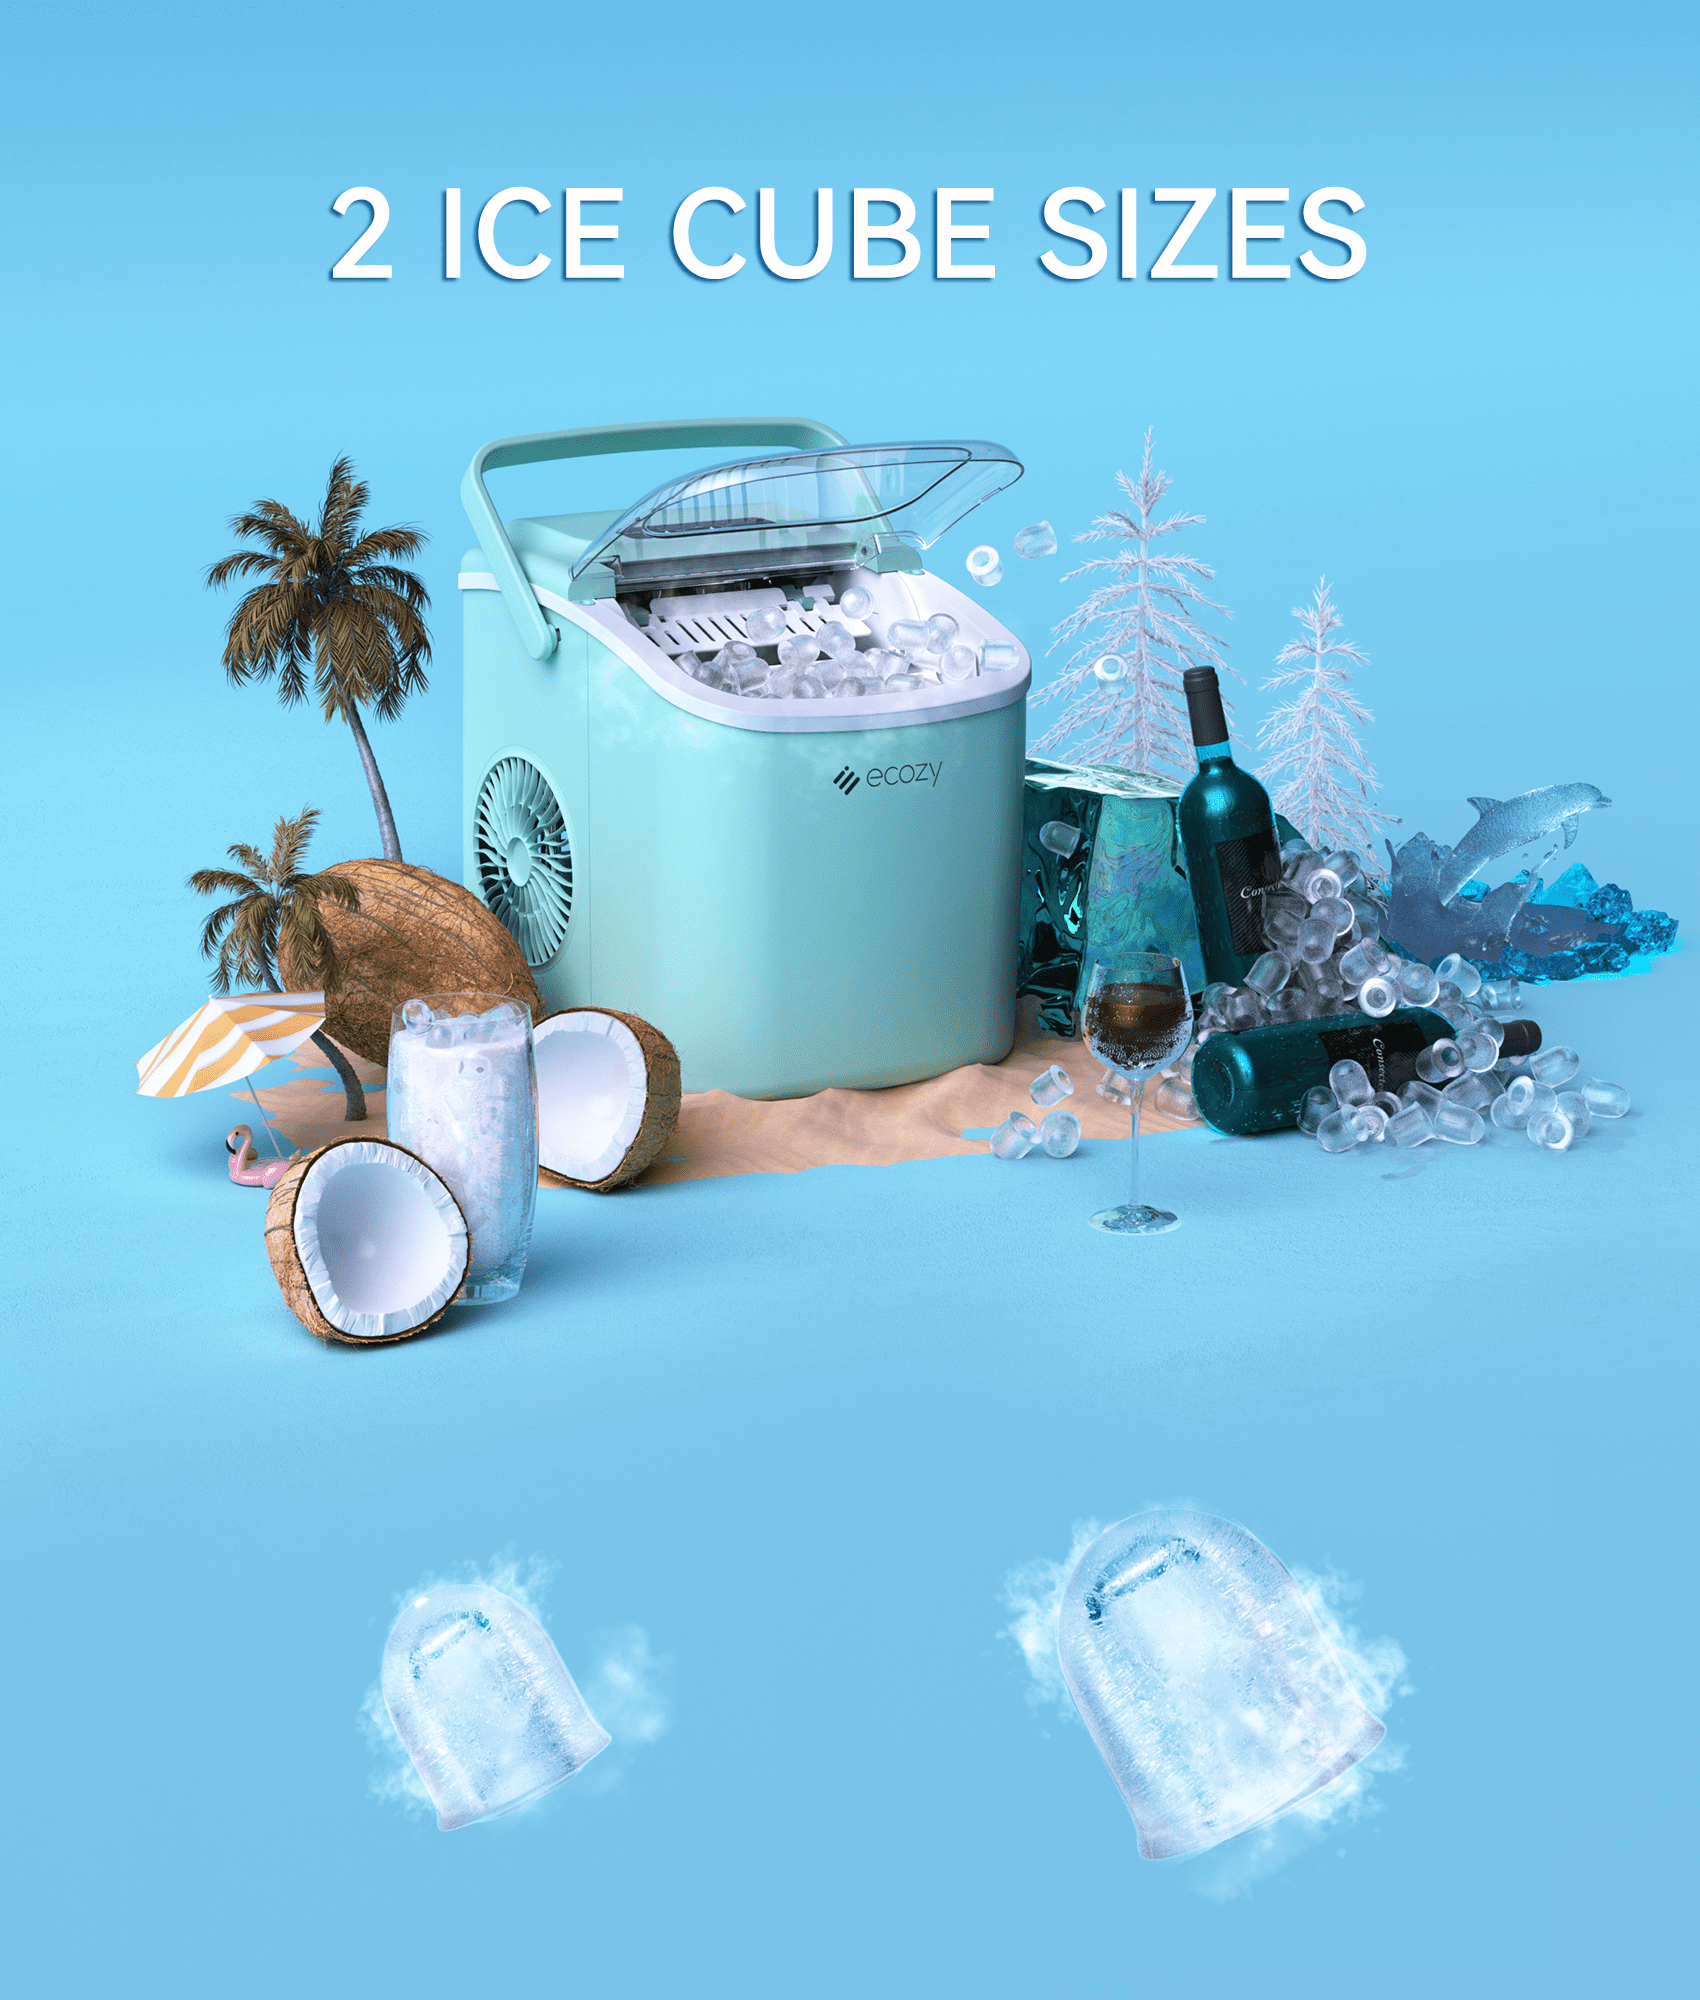 ecozy Portable Countertop Ice Maker - 9 Ice Cubes in 6 Minutes, 26